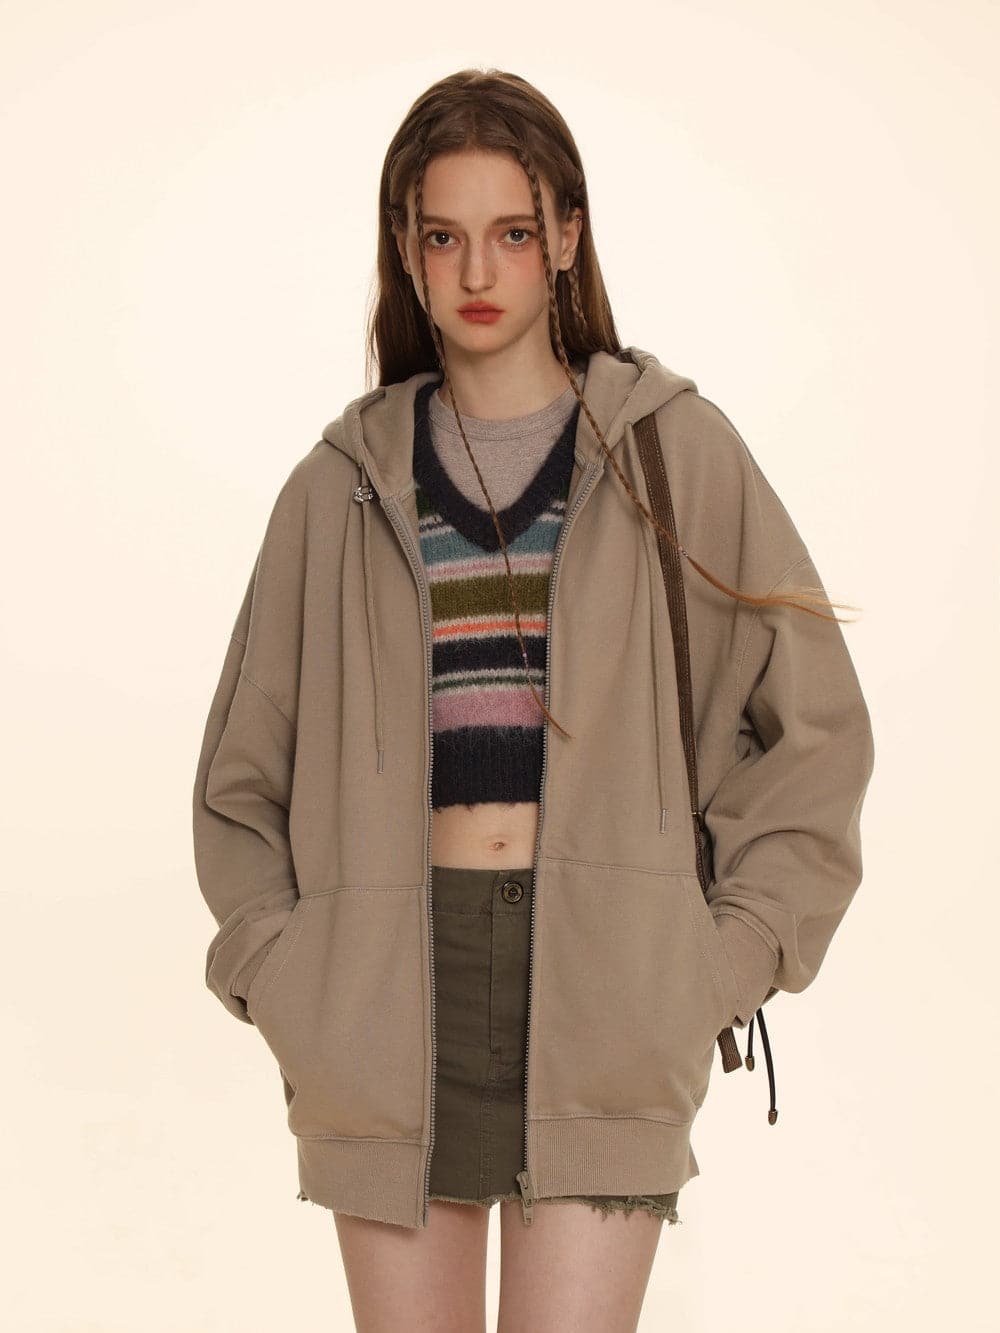 Oversized Hooded Parka - Effortlessly Casual And Stylish - chiclara